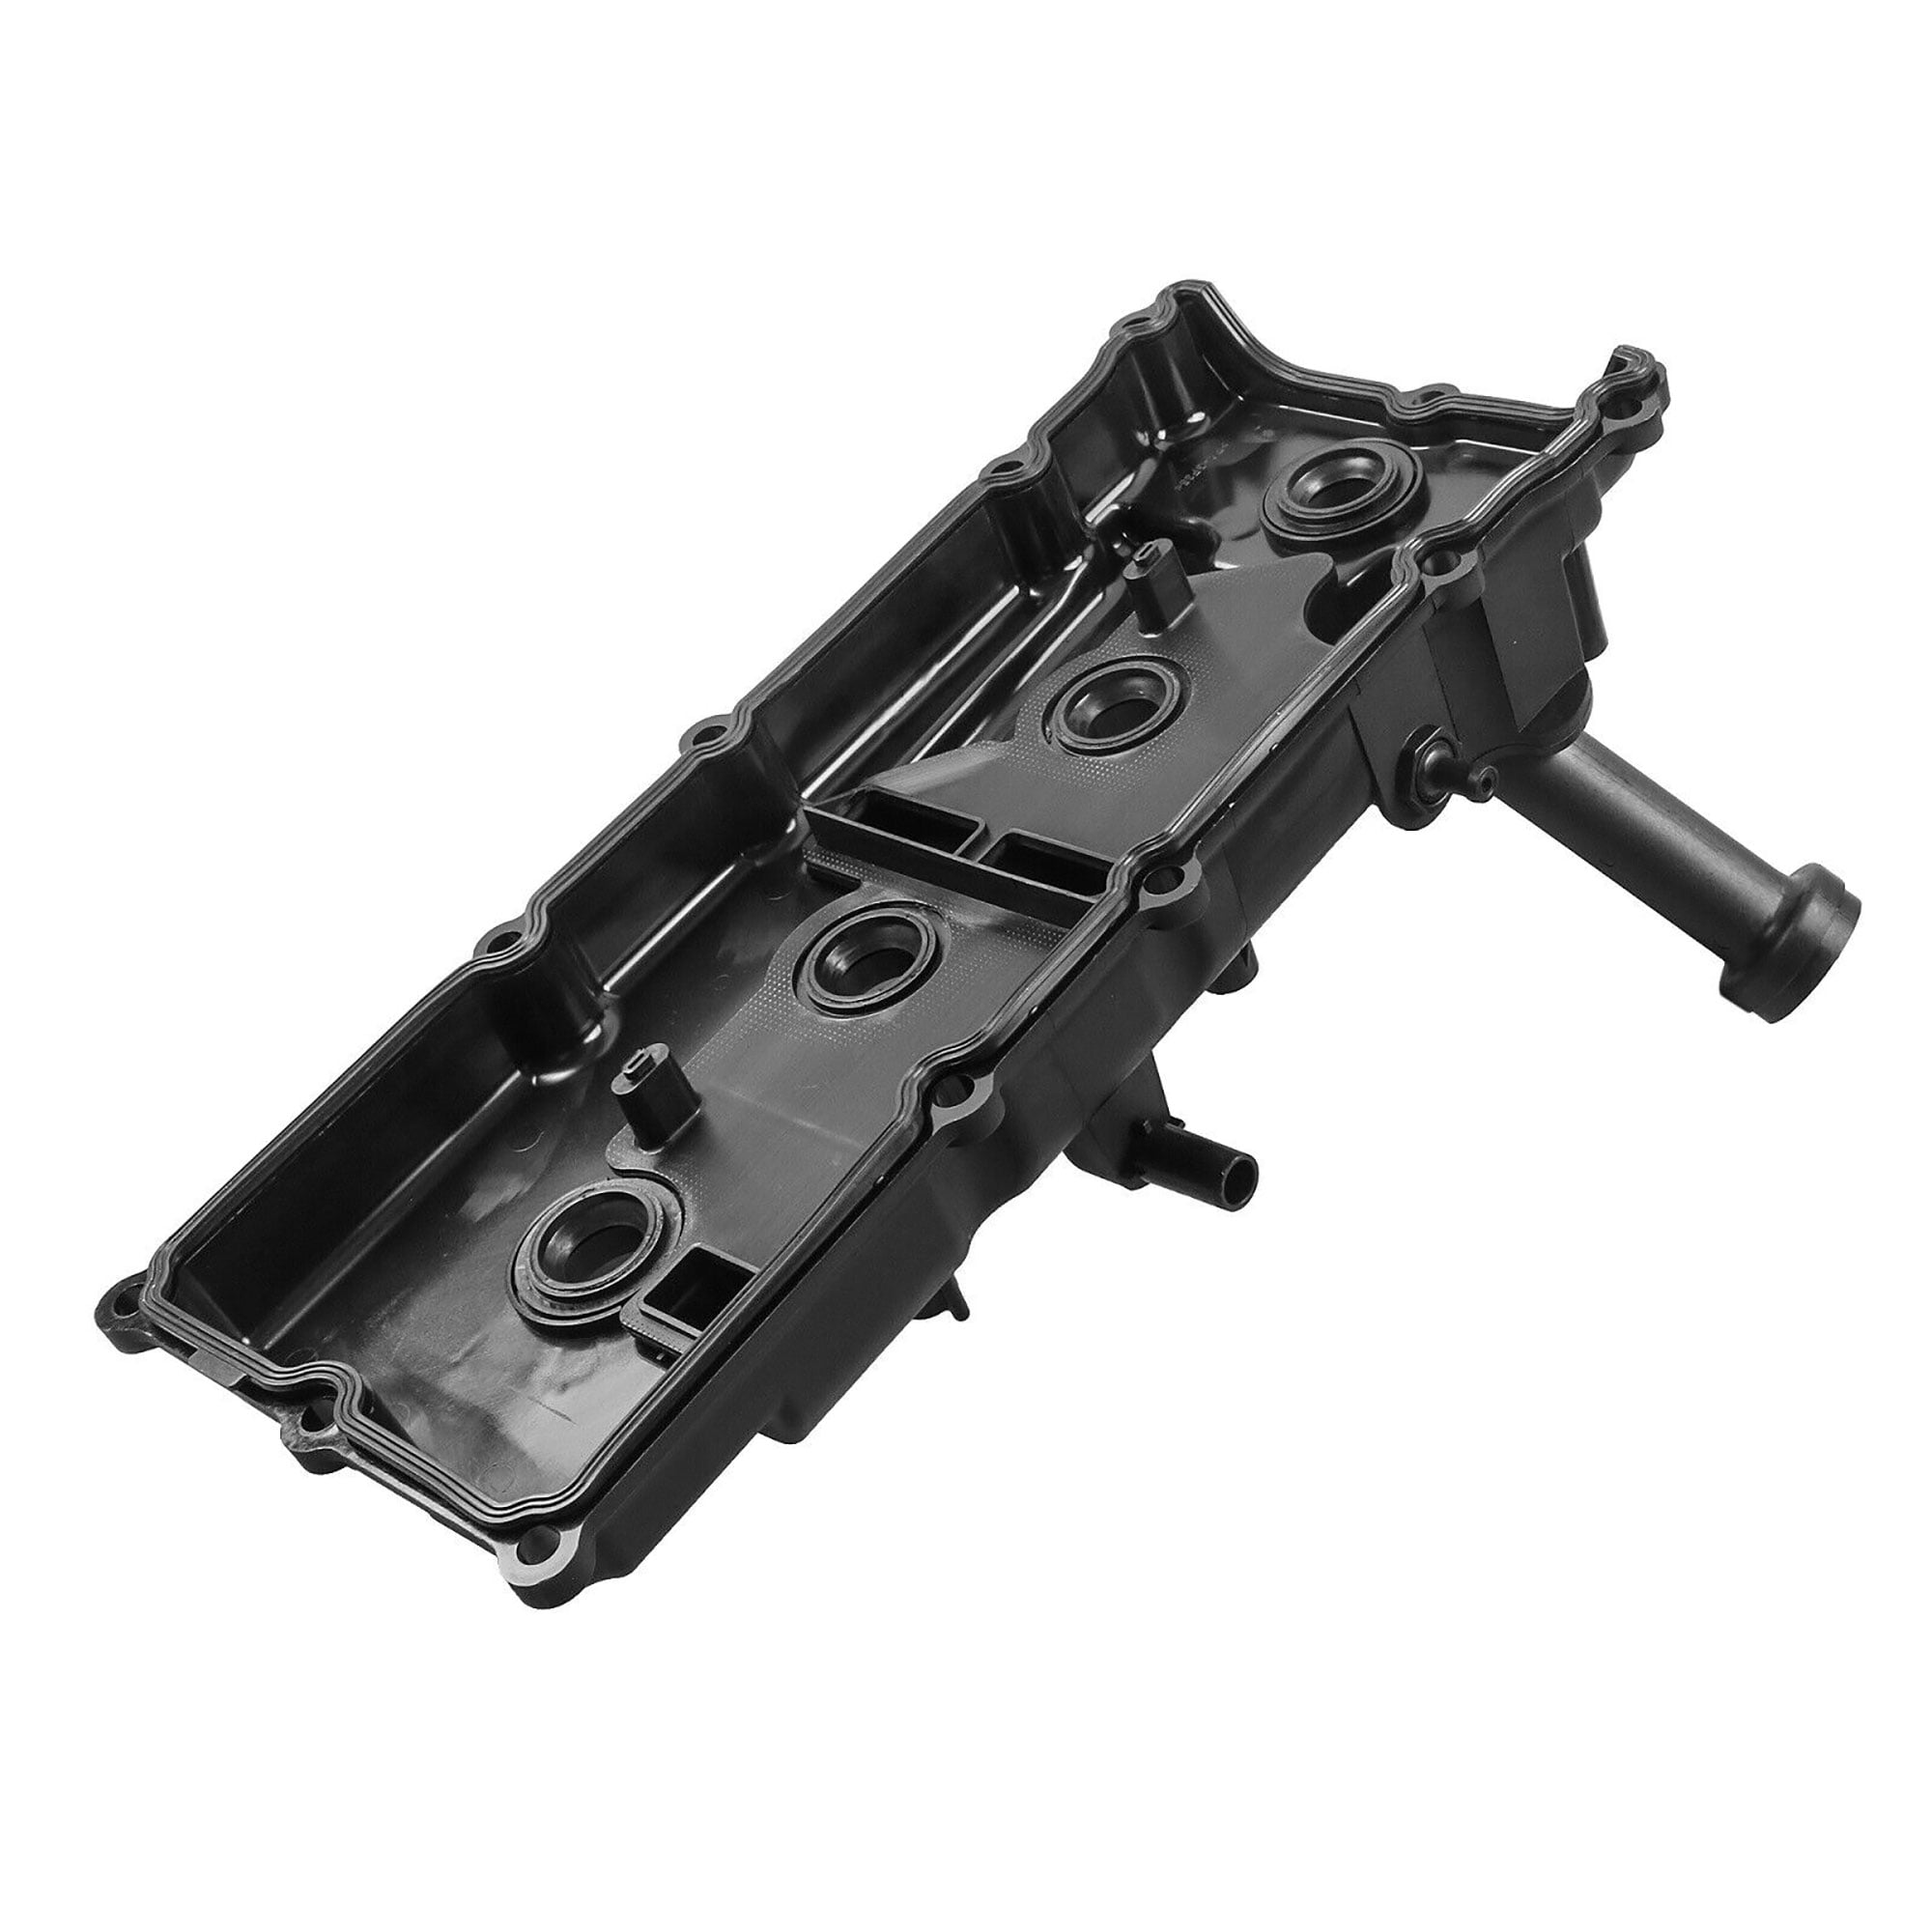 Valve Cover with Gasket for Right Passenger Side RH and Left Driver Side LH  For 2007-2015 Nissan Armada Titan For 2012-2016 Nissan NV2500 NV3500 For  2008-2012 Nissan Pathfinder 13264-ZE01A V8 5.6L